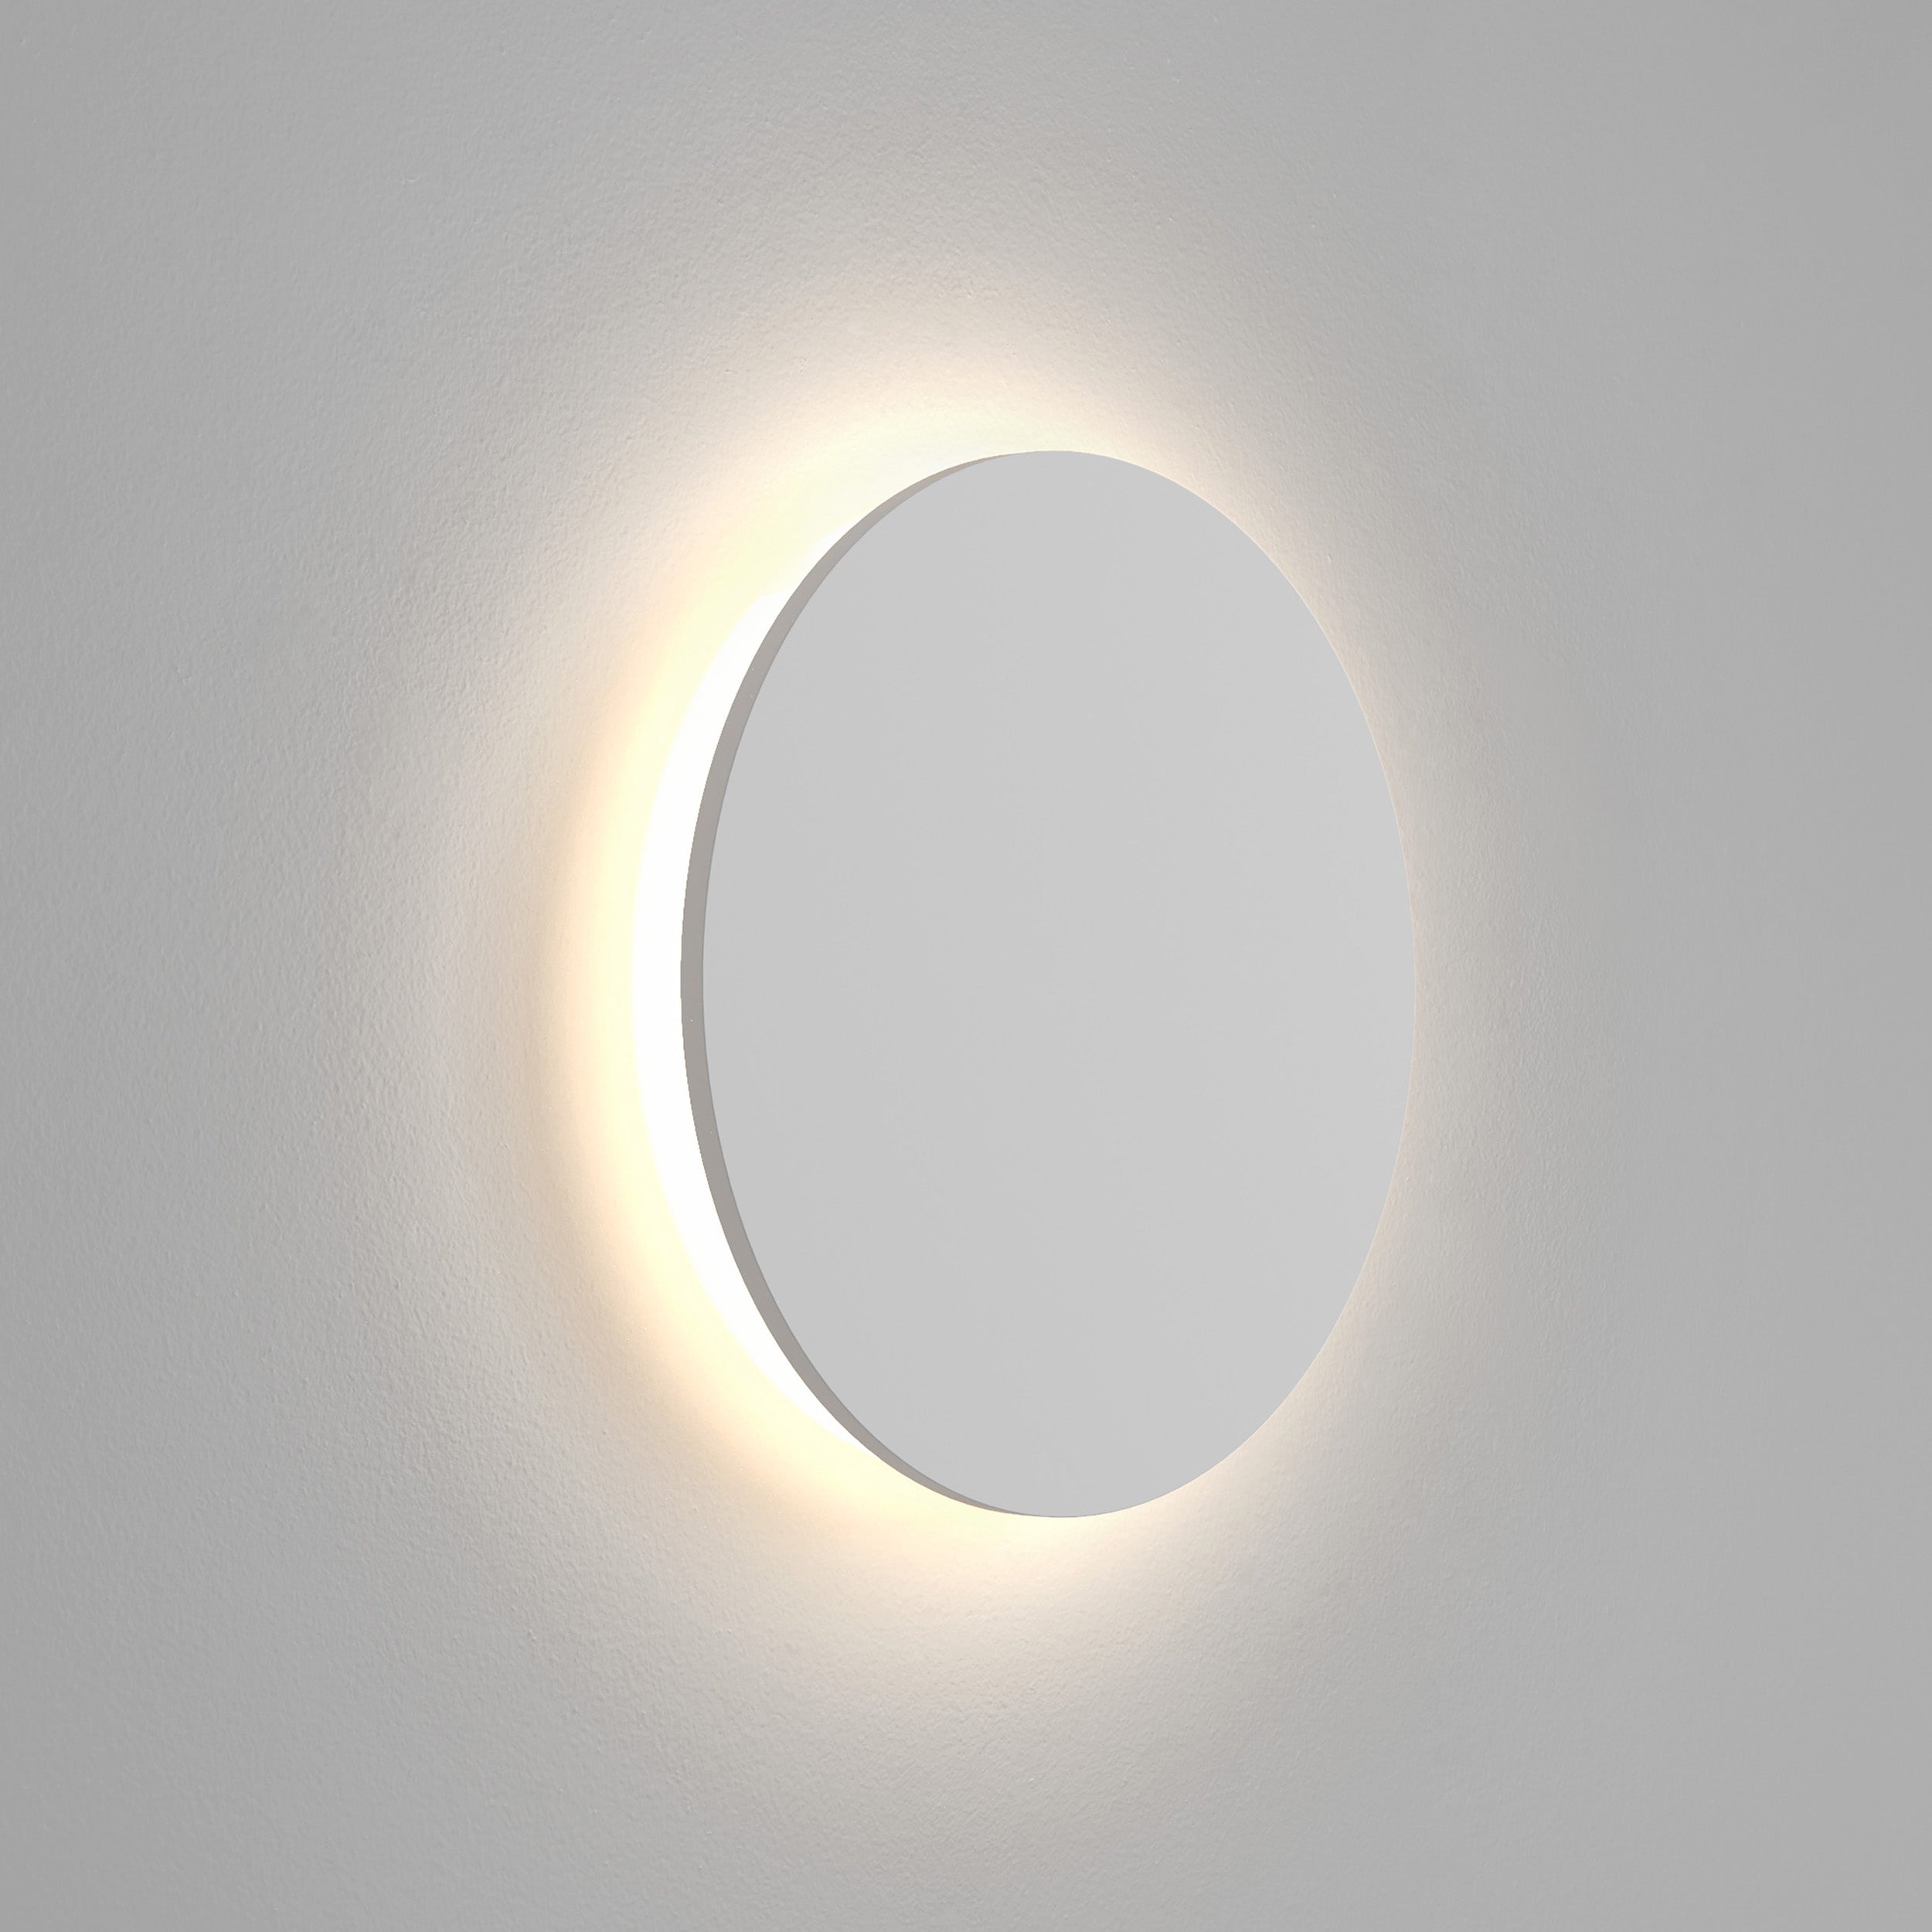 Astro Lighting Eclipse Wall Light Fixtures Astro Lighting 1.69xx Plaster Yes (Integral), LED Strip